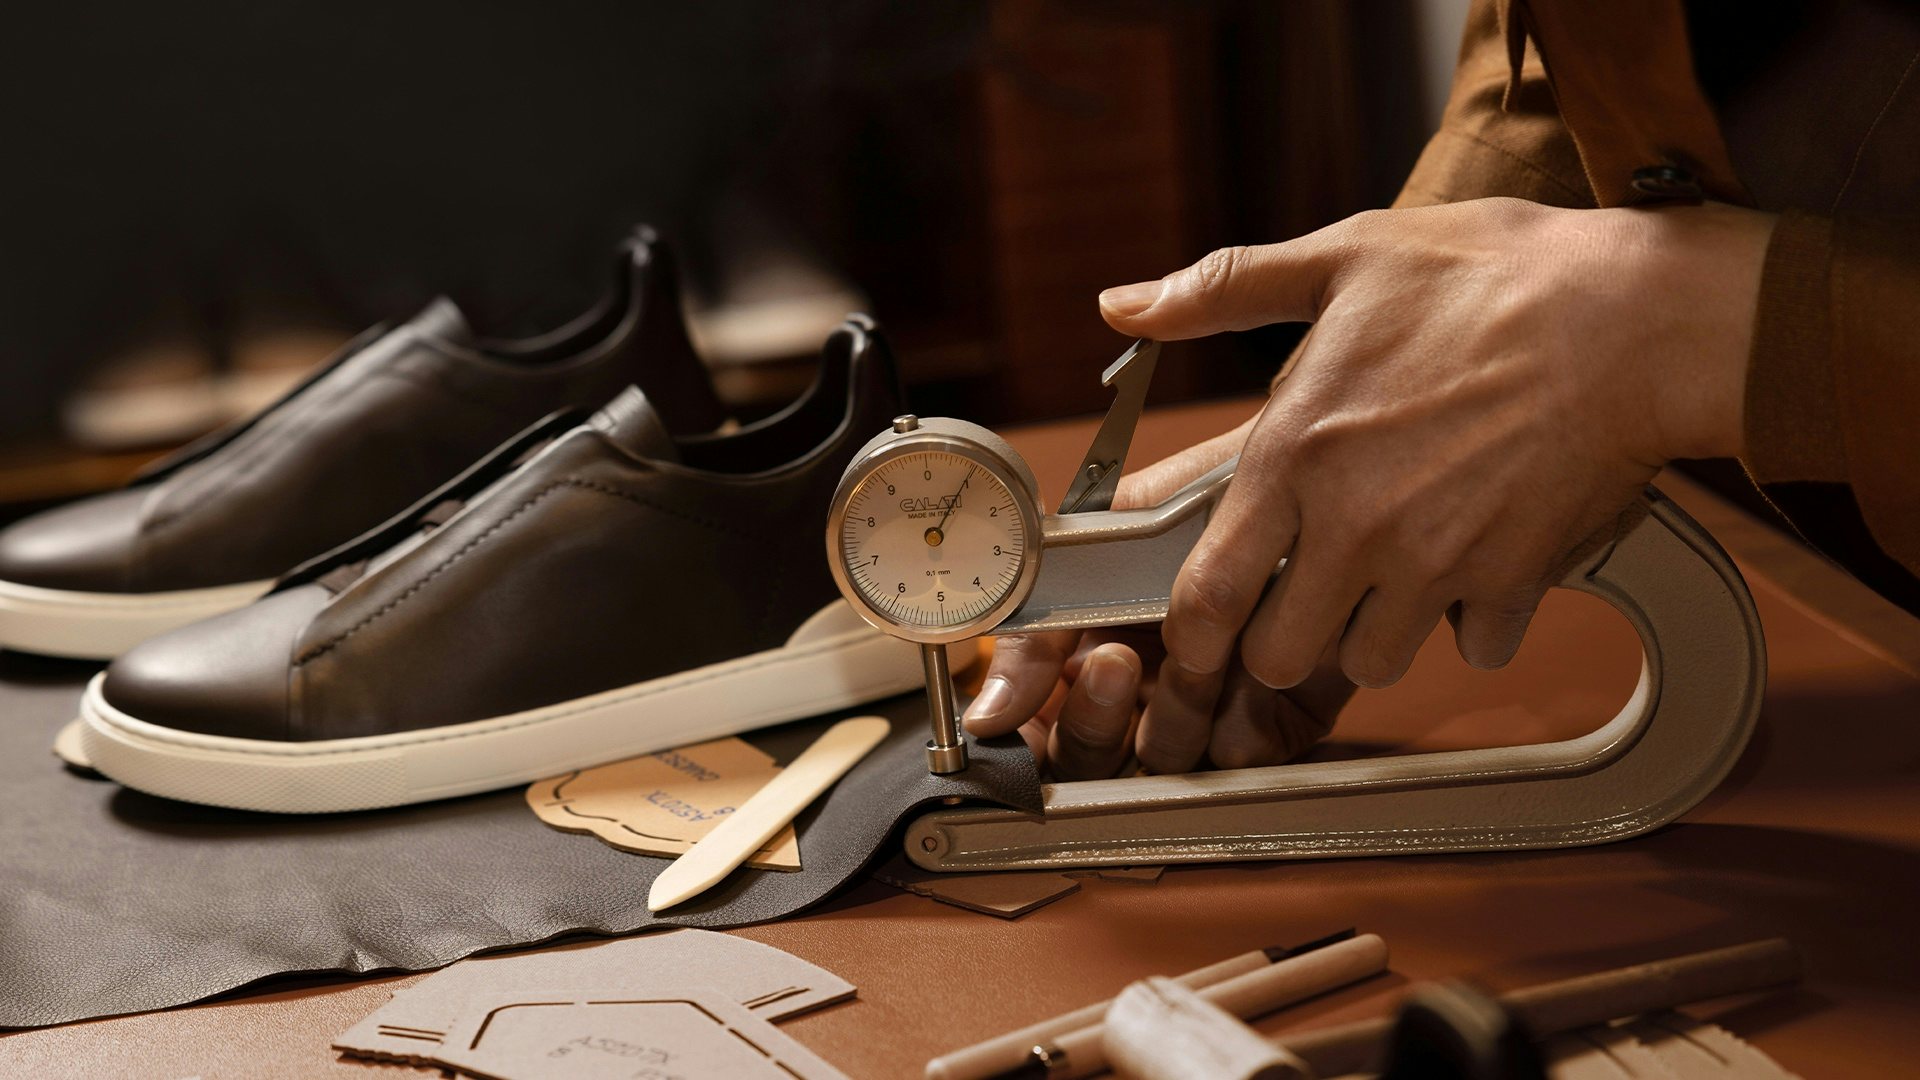 To accomplish a “second skin” sensation, Zegna’s latest Triple Stitch Secondskin Luxury Leisurewear Shoes use the finest leather in the luxury shoe market, at just 0.8mm thin. Photo: Zegna